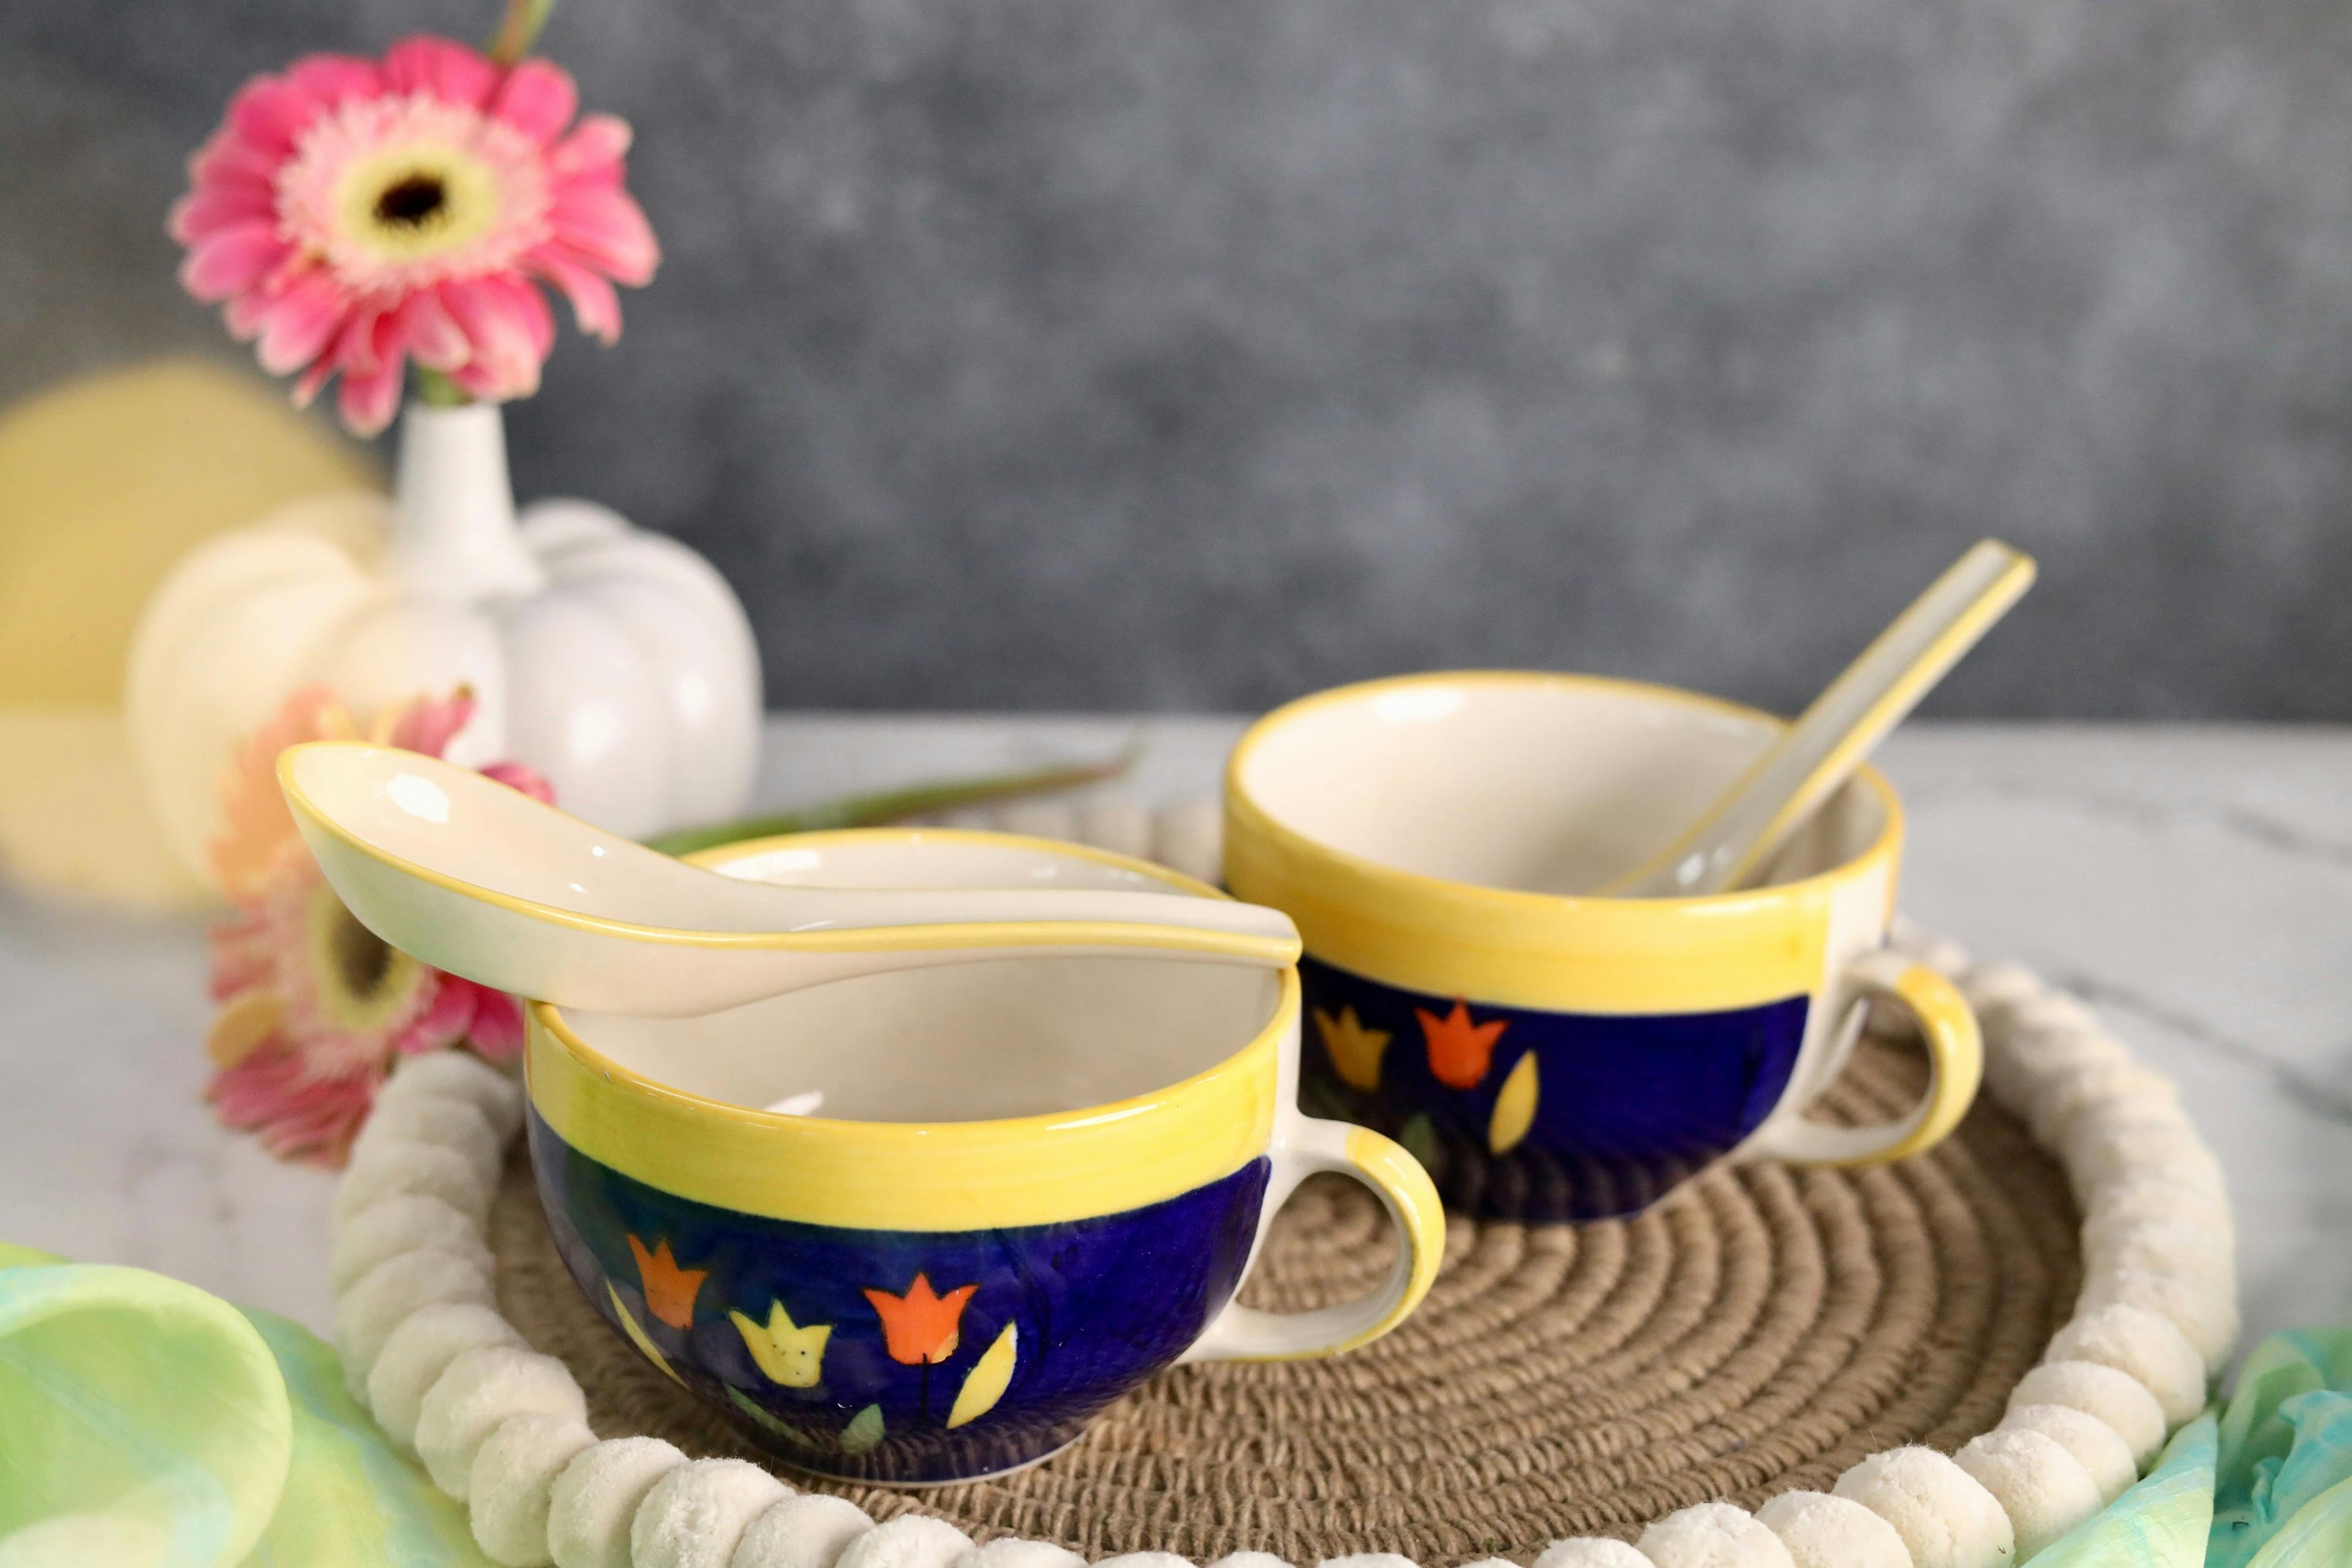 Bagh Handpainted Soup Mug with Spoon - Set of 2, a product by Olive Home accent